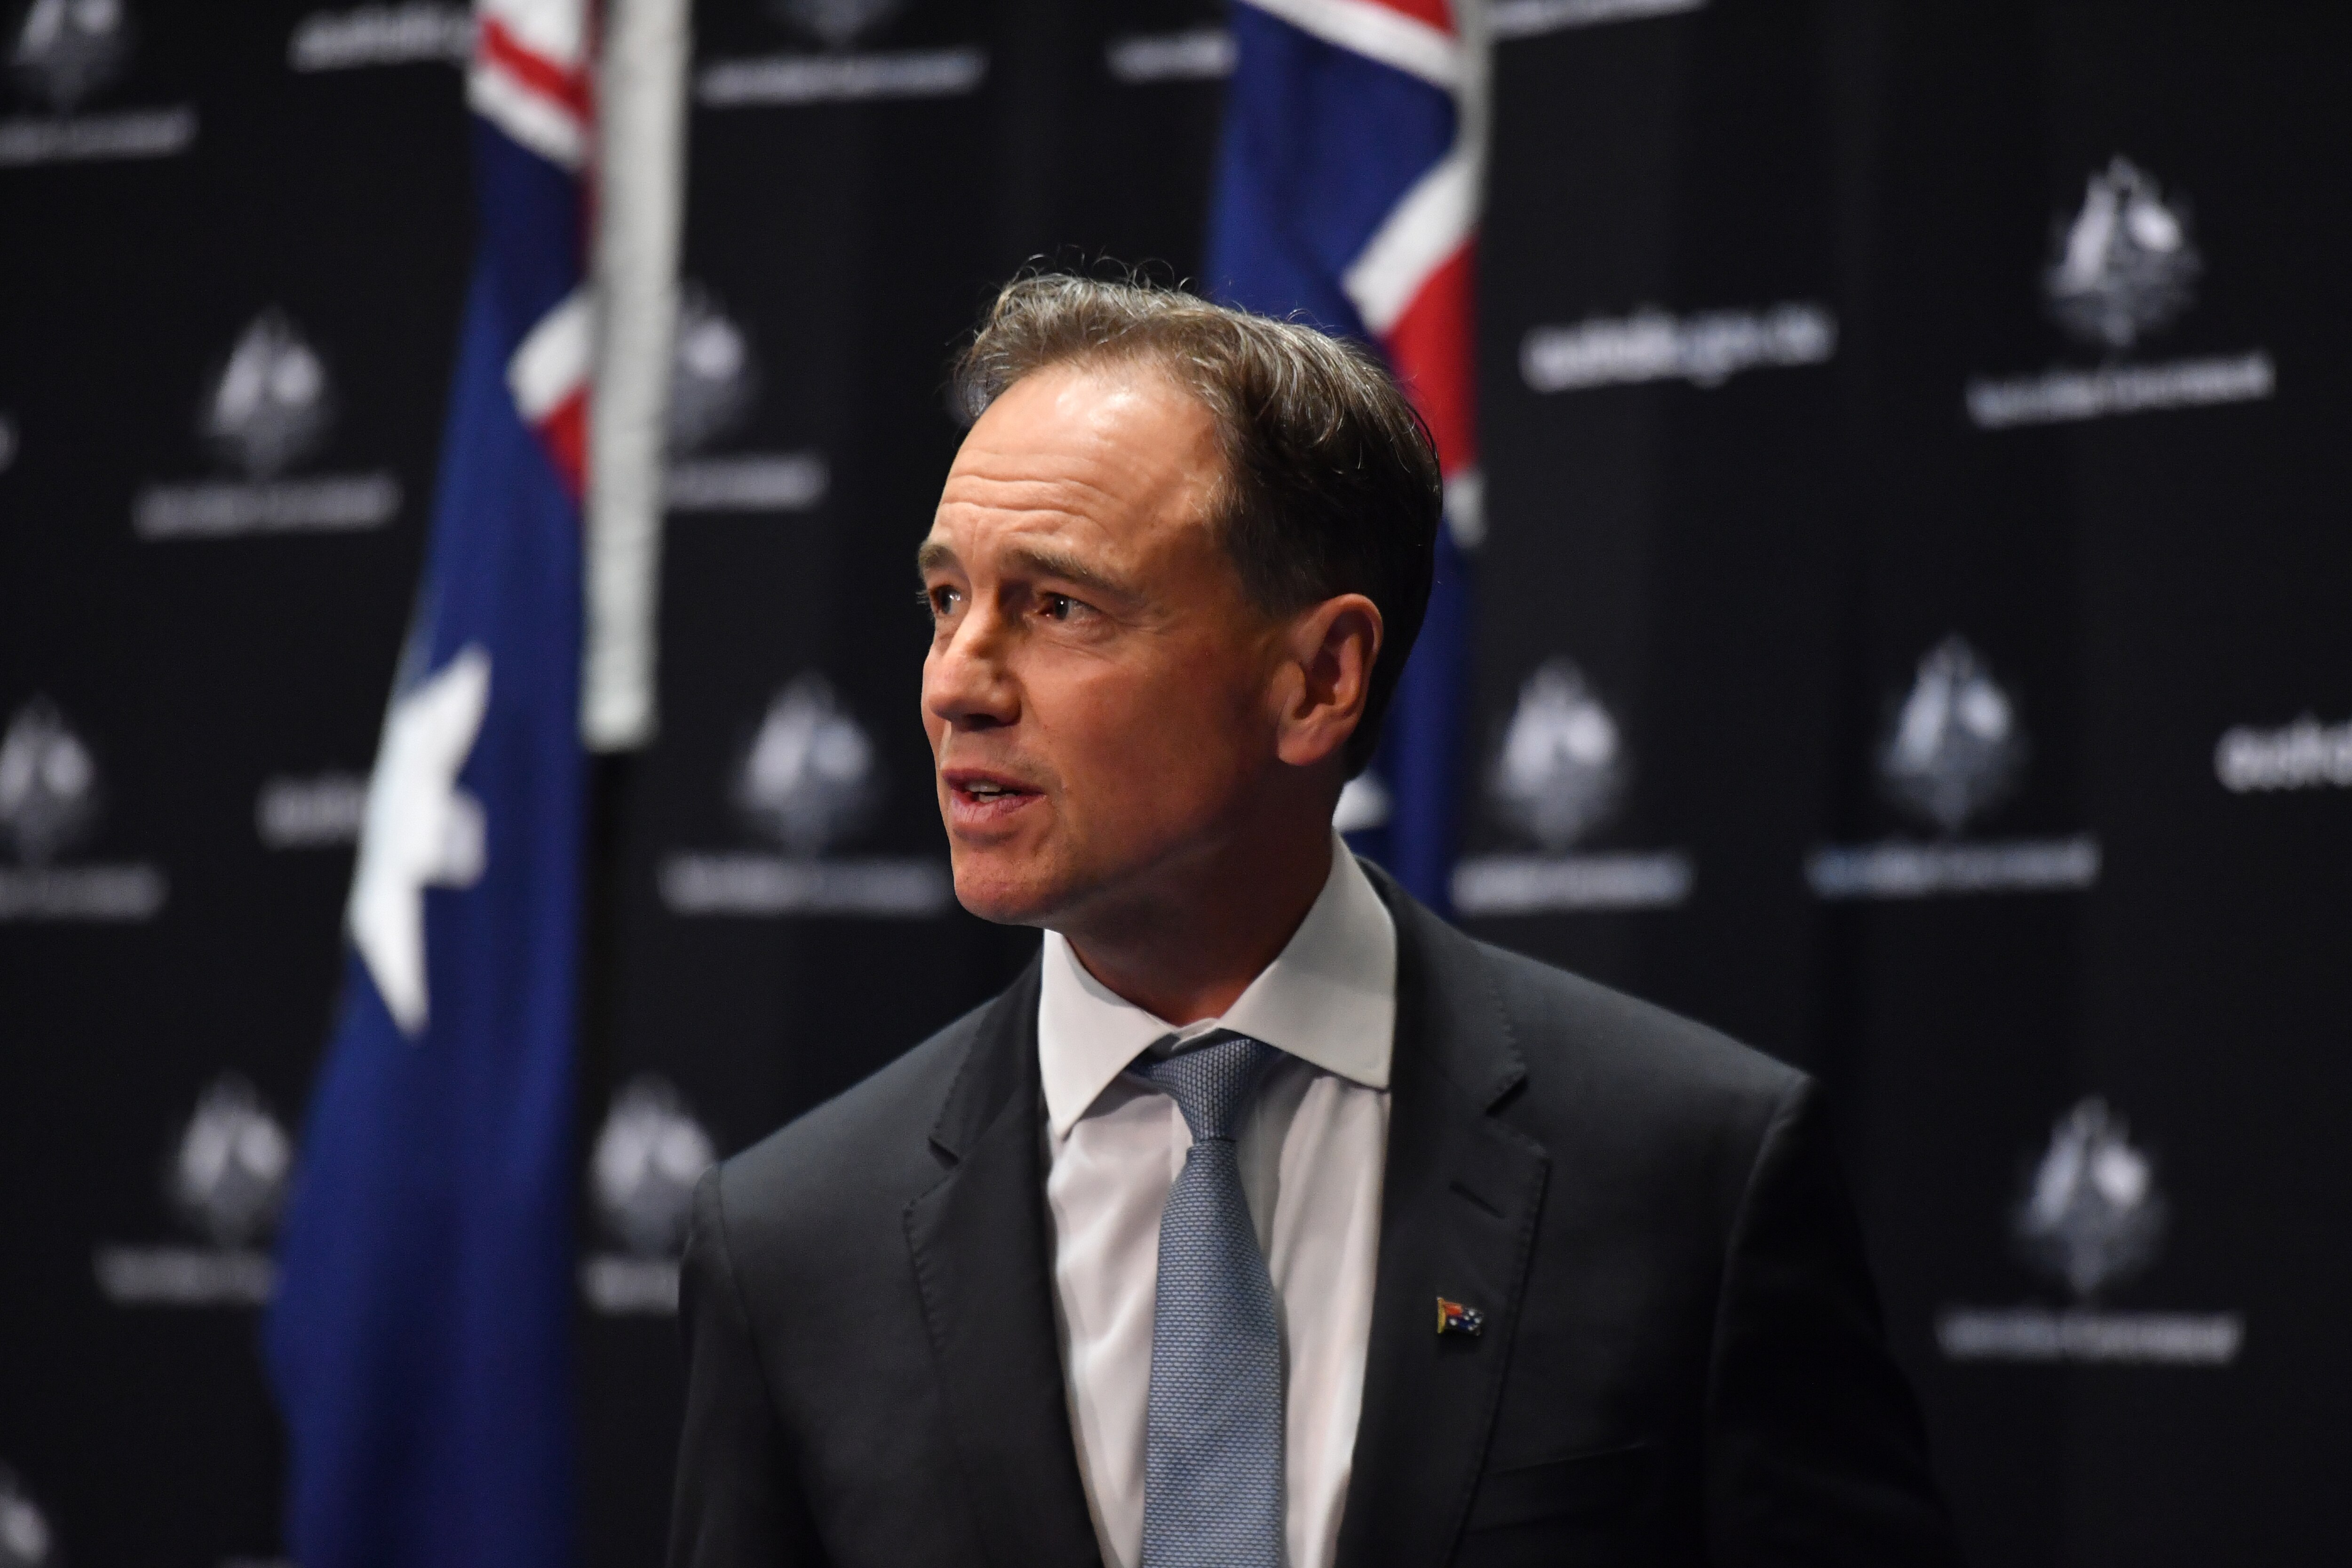 Minister for Health Greg Hunt has praised Australians' compliance with social distancing laws.